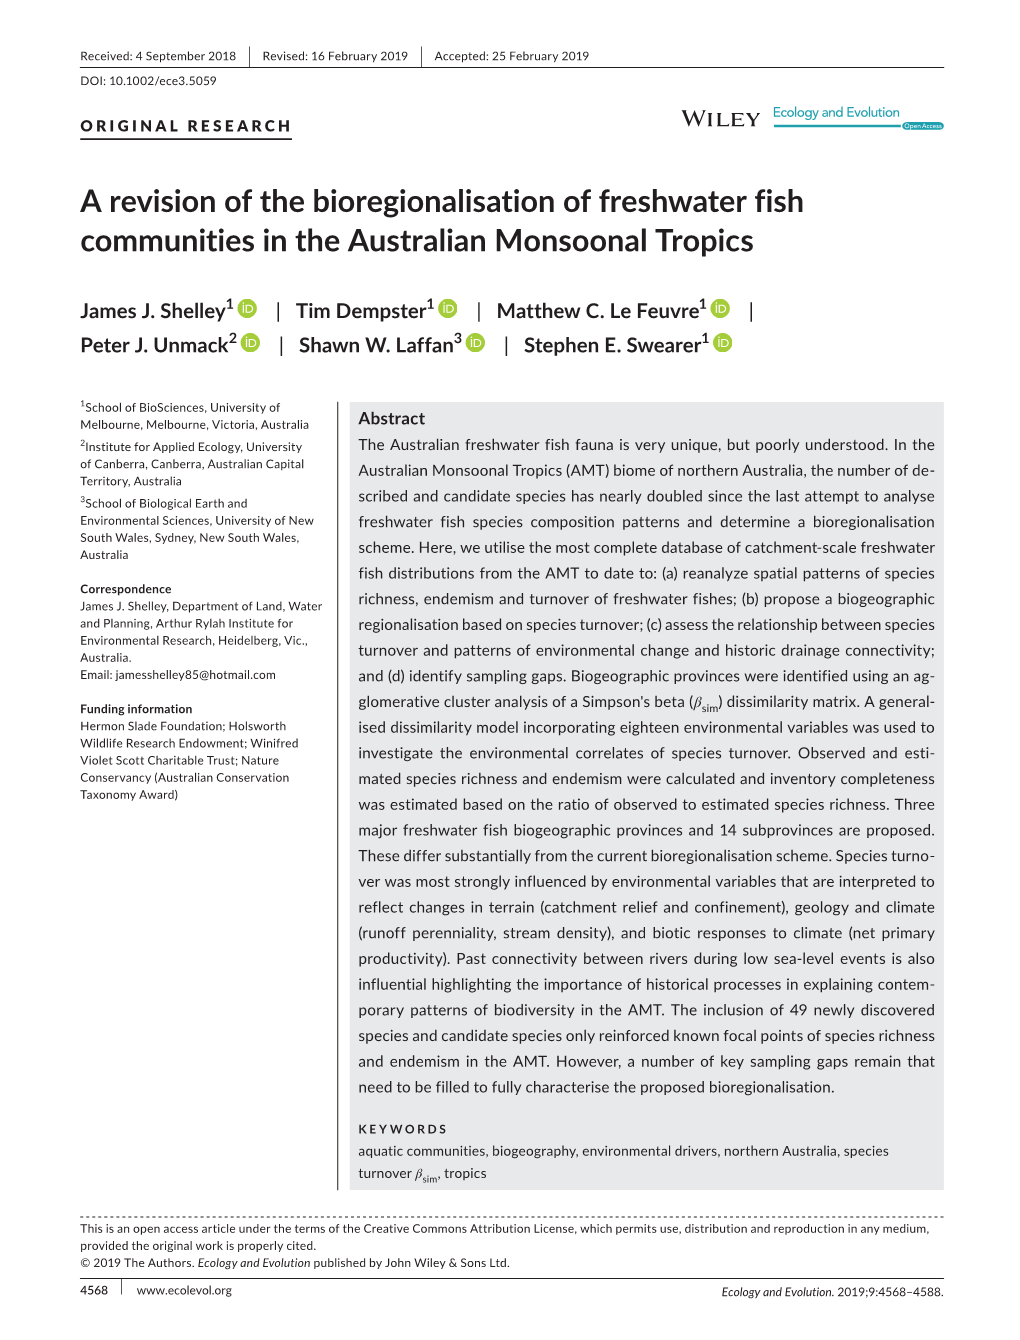 A Revision of the Bioregionalisation of Freshwater Fish Communities in the Australian Monsoonal Tropics